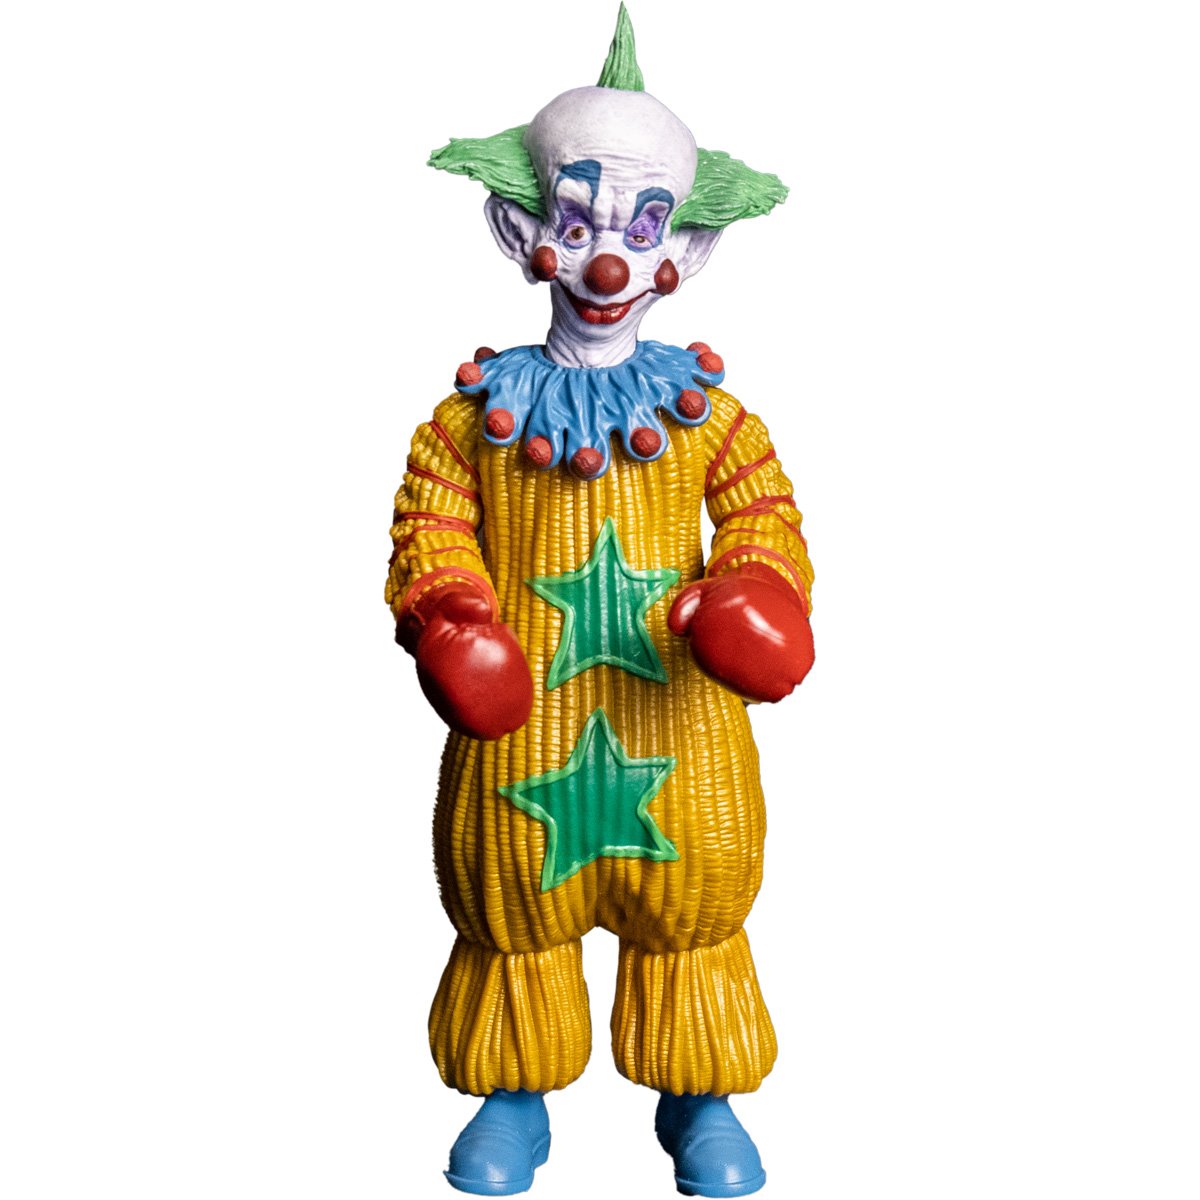 Killer Klowns From Outer Space Shorty Scream Greats 8-inch Action Figure Trick or Treat Studios